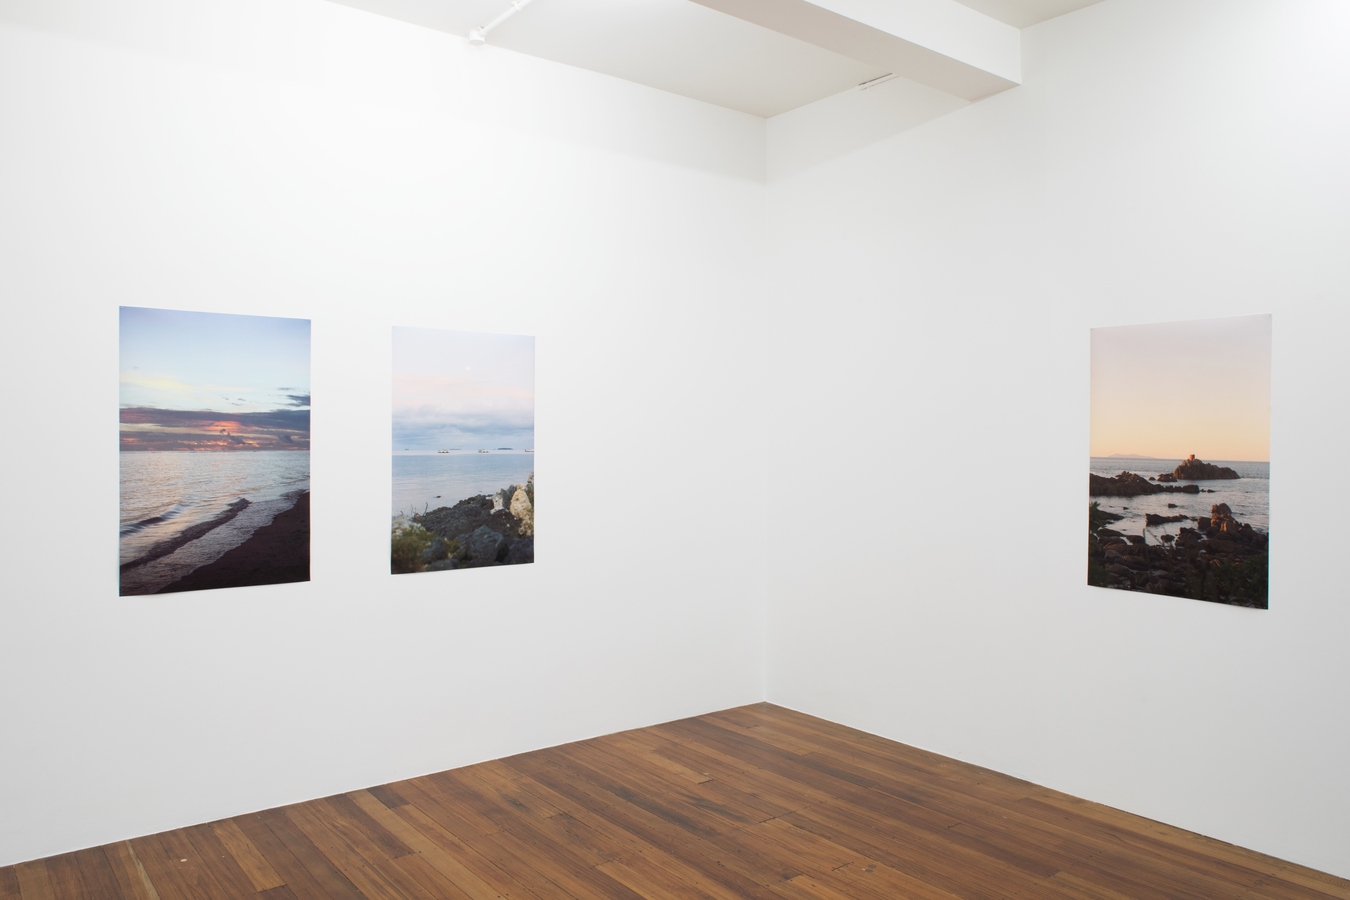 Image: Emily Parr, Surfacing (installation view), 2021. Photo: Janneth Gil.